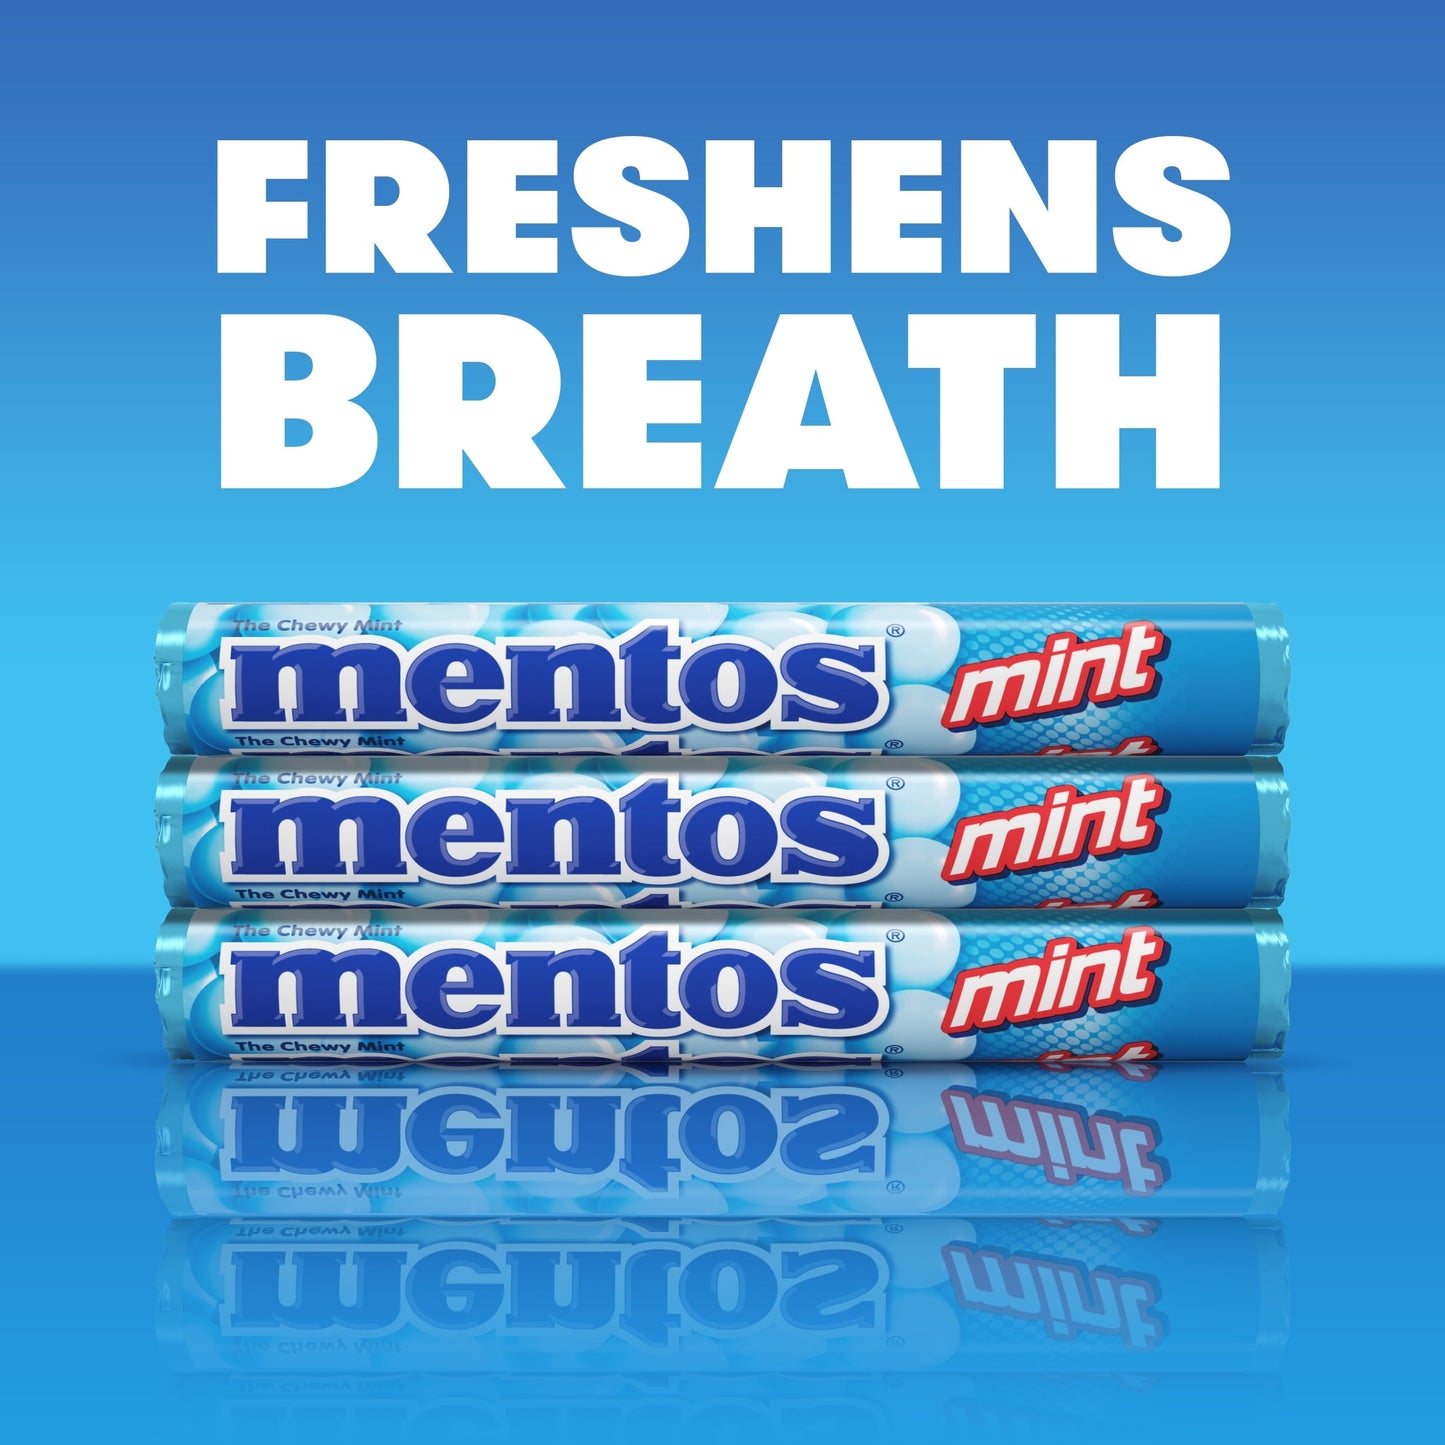 Mentos Chewy Mint Candy Roll, Fresh Mint Flavor, Peanut and Tree Nut Free, Regular Size, 1.32 oz